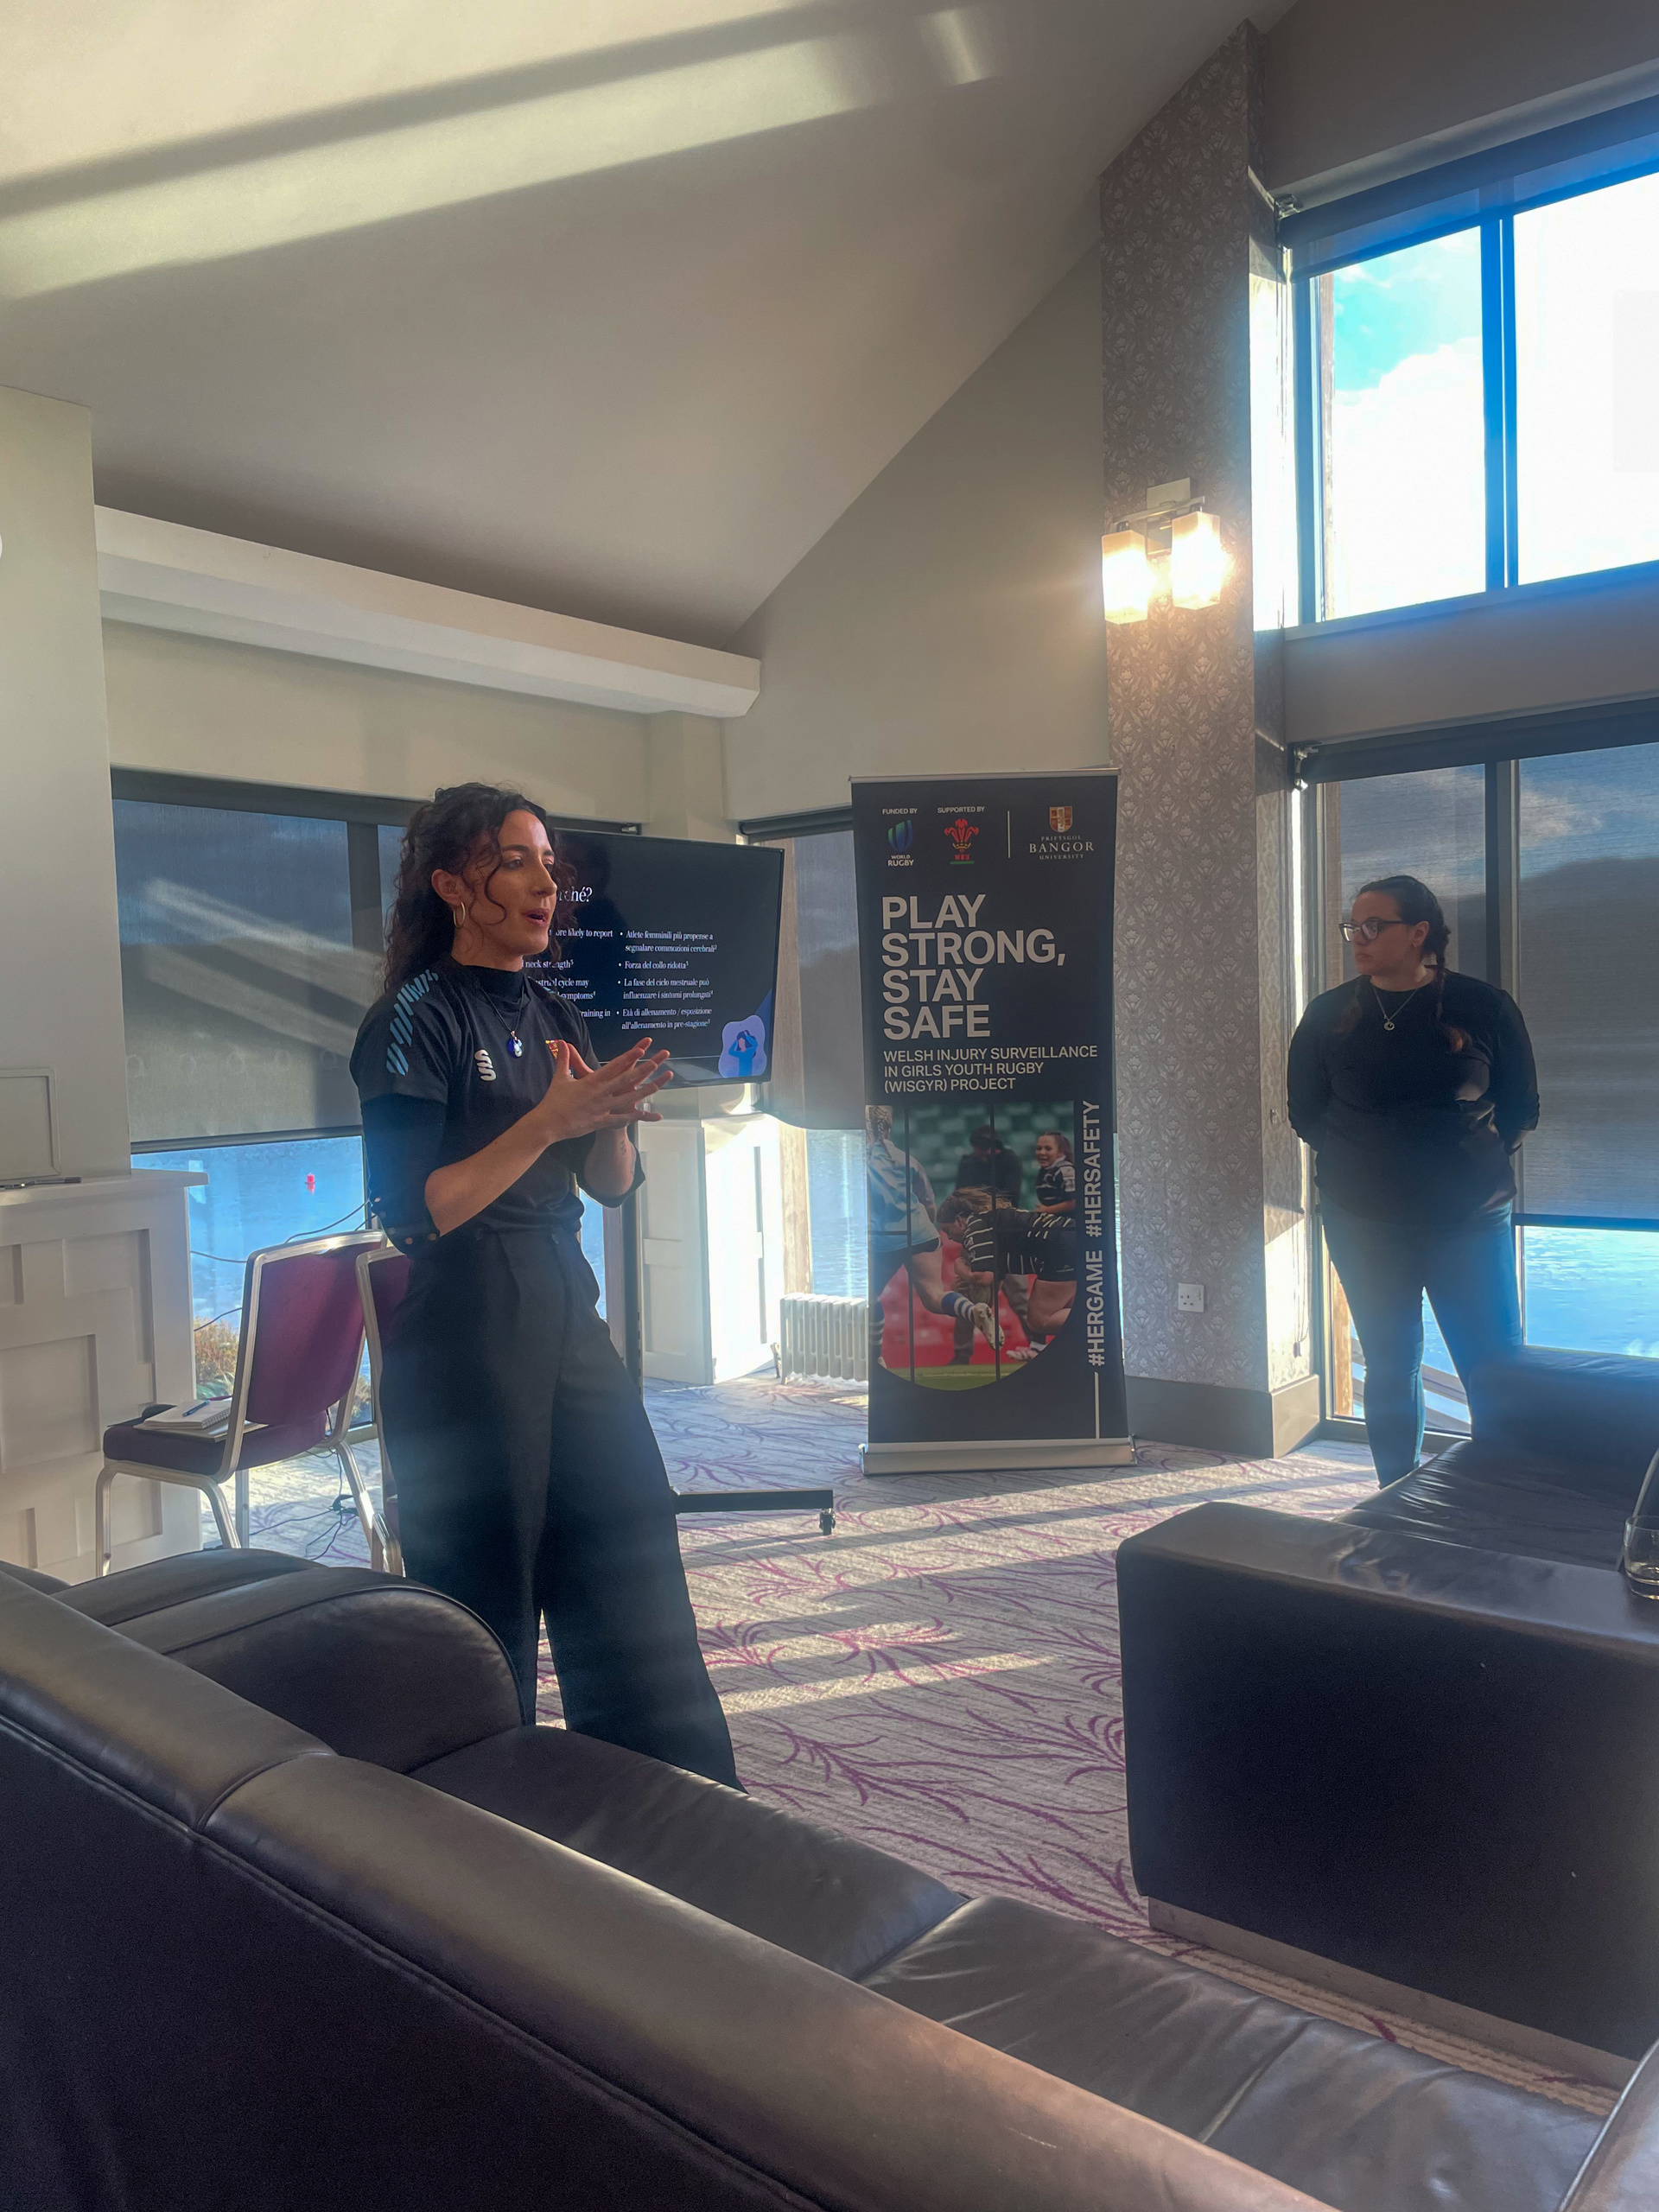 Seren doing a workshop on concussion during the Women's Six Nations Rugby Tournaments